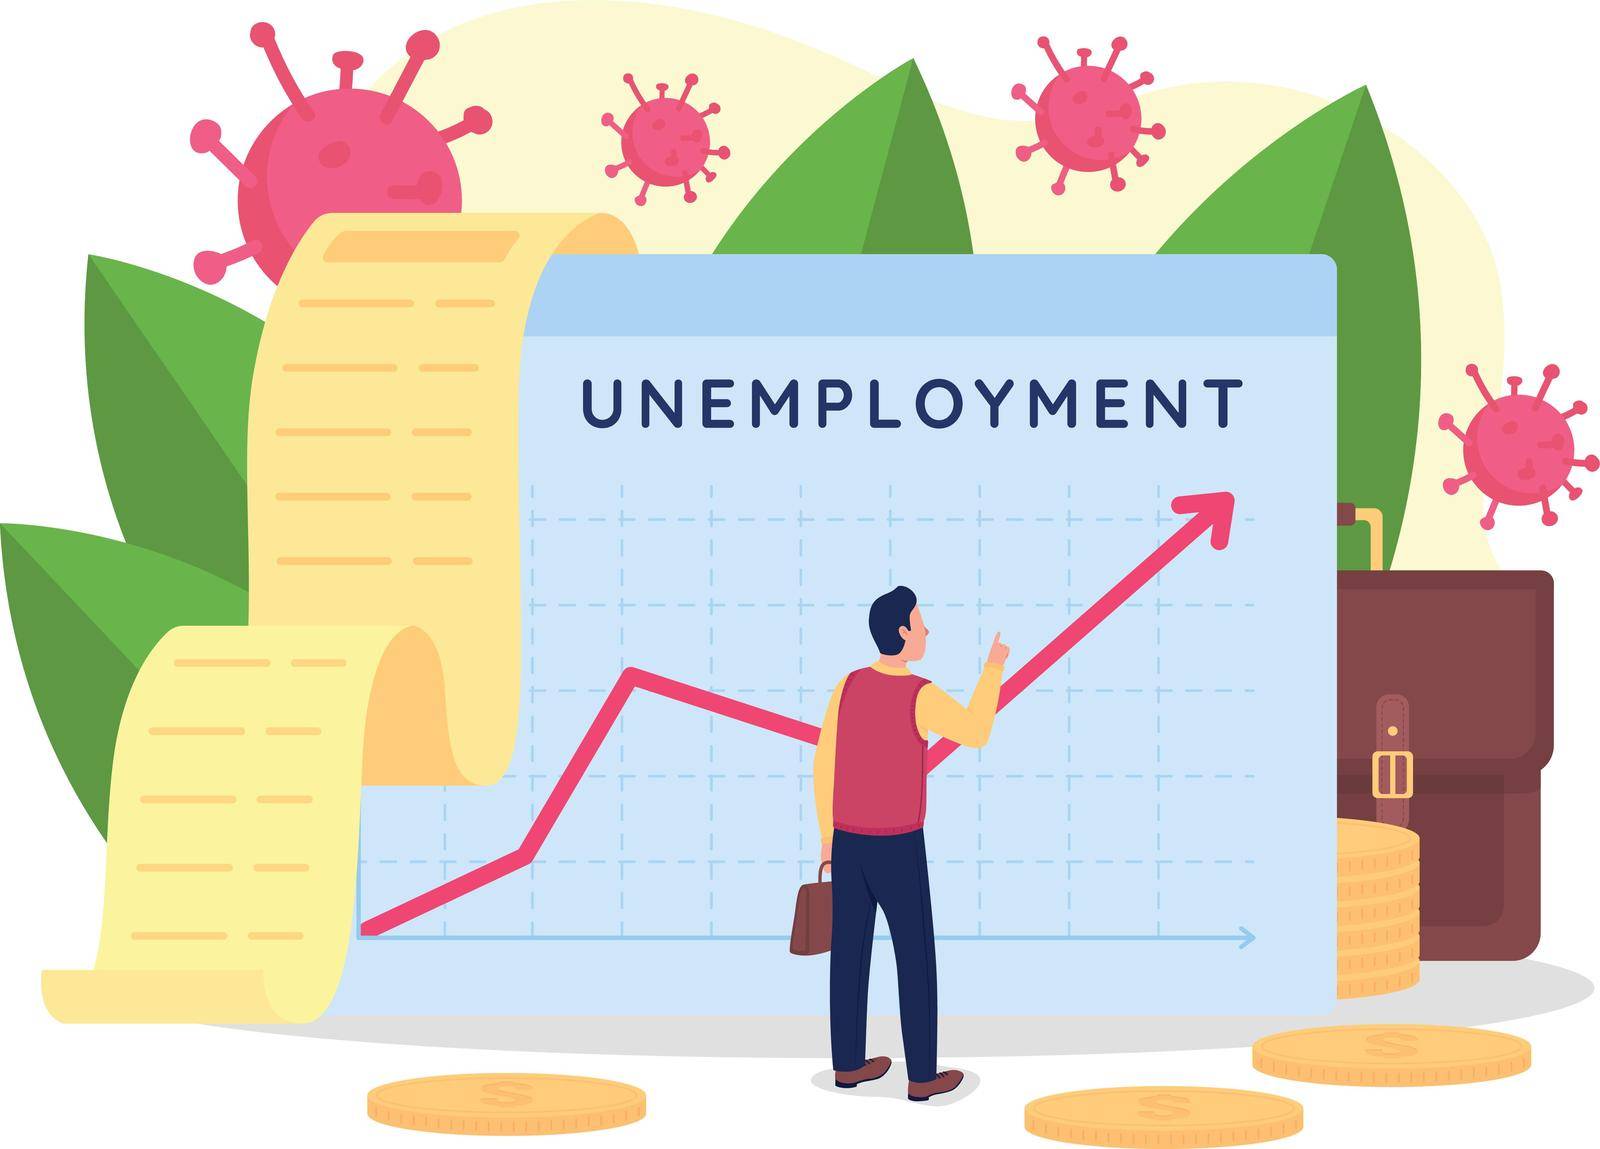 Rising unemployment rate flat concept vector illustration. Business failure. Employment problem increasing. Jobless person 2D cartoon character for web design. Financial recession creative idea